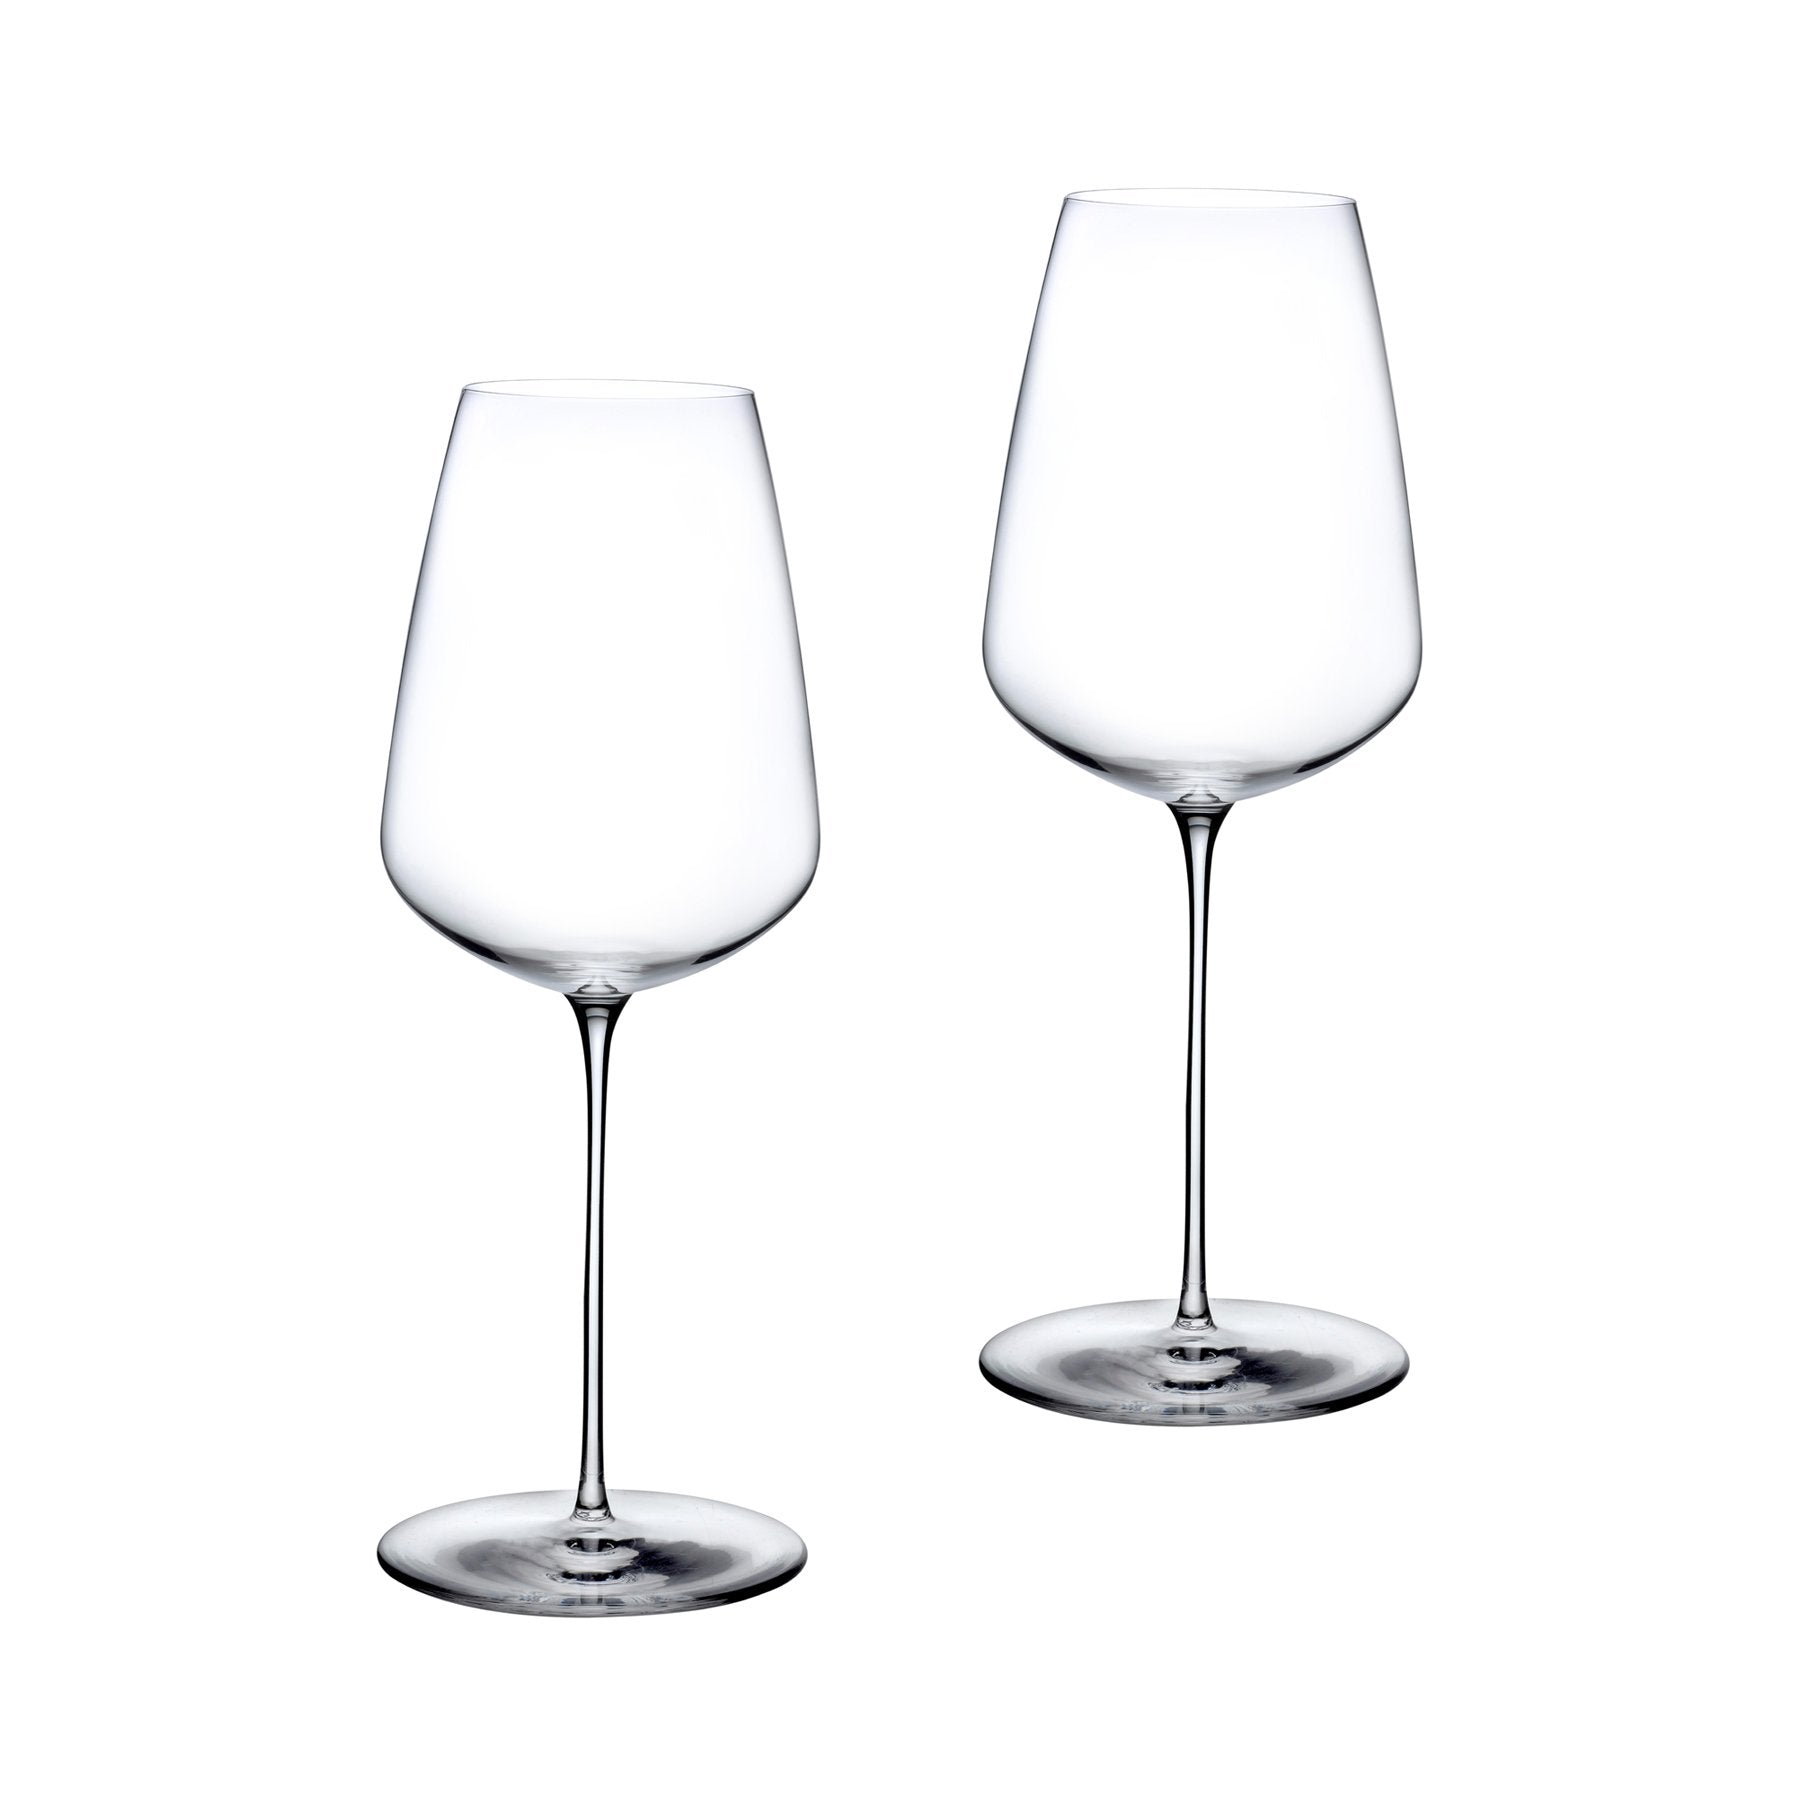 3 x 9 in. V-Shaped White Wine Glasses with Clear Stem, Set of 6